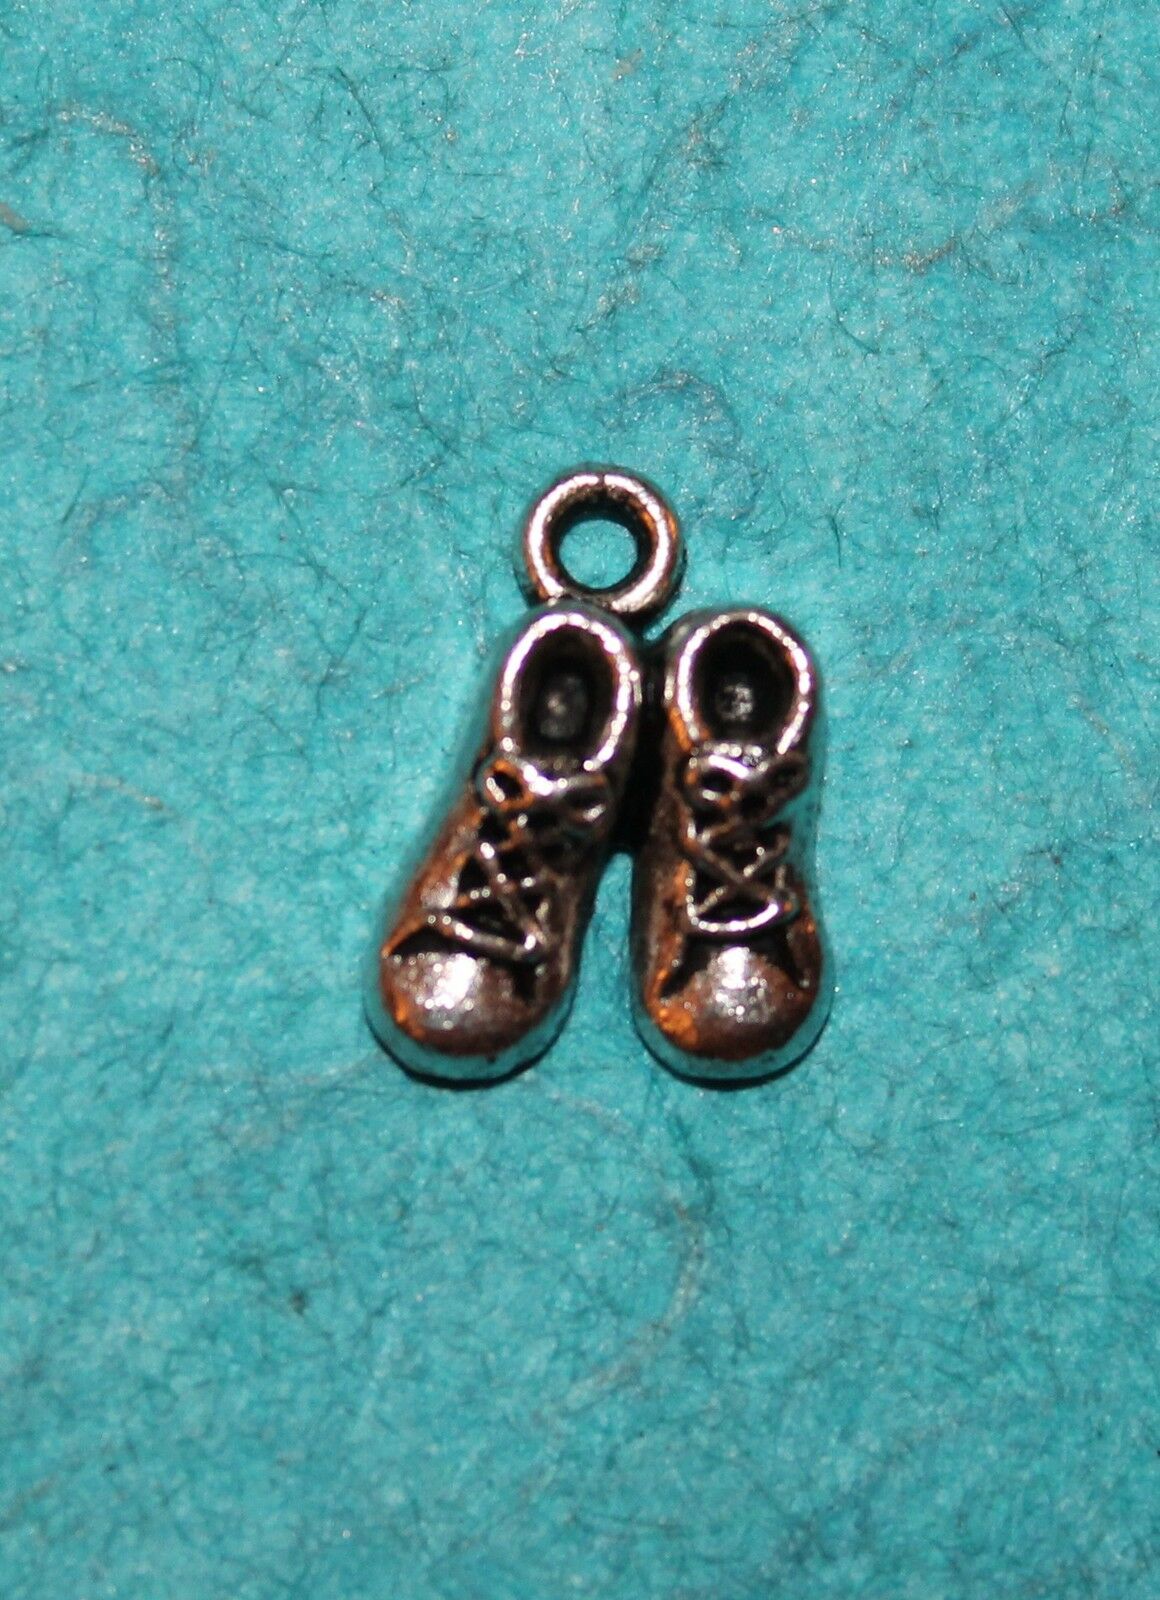 Pendant Baby Shoes Charm Baby Walking Shoes New Baby Charm Pregnancy Expecting